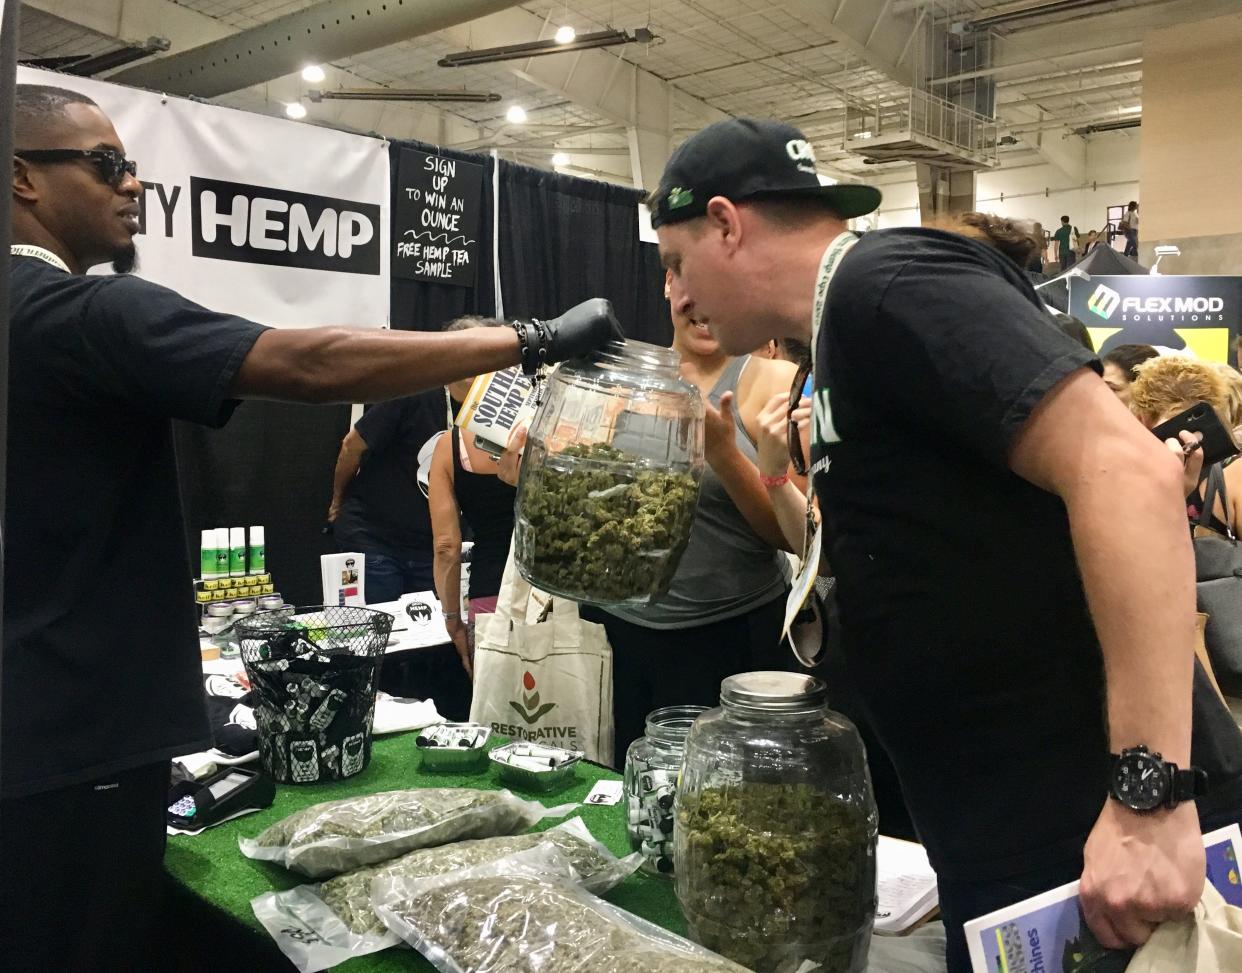 An attendee at the Southern Hemp Expo smells raw hemp flower sold by one of its vendors on Sept. 6, 2019.